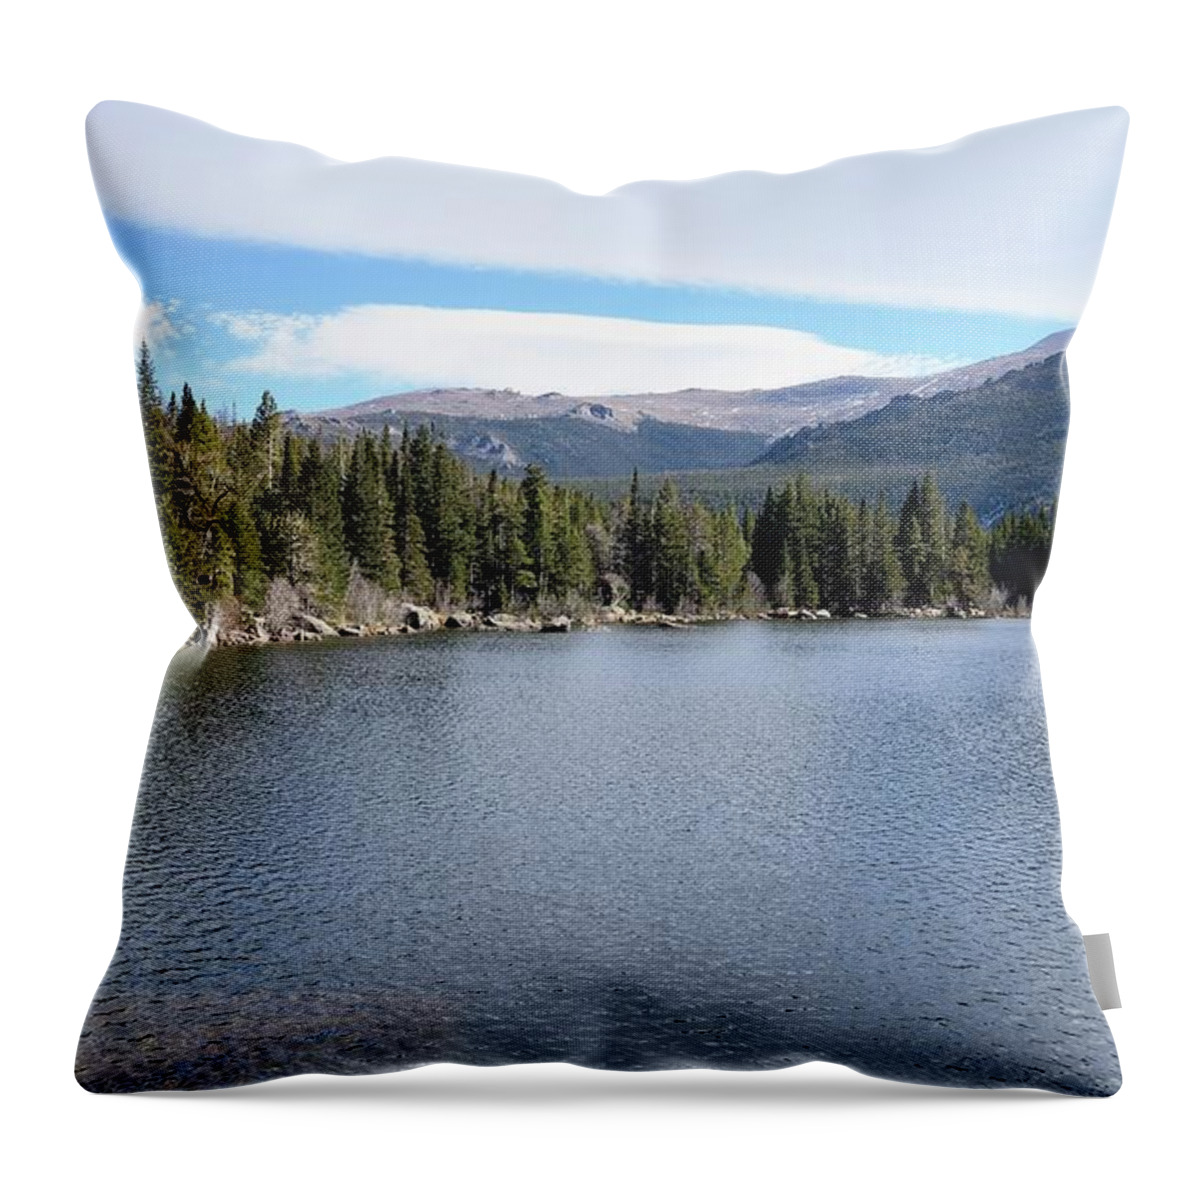 Scenics Throw Pillow featuring the photograph Bear Lake, Rocky Mountain National Park by Rivernorthphotography